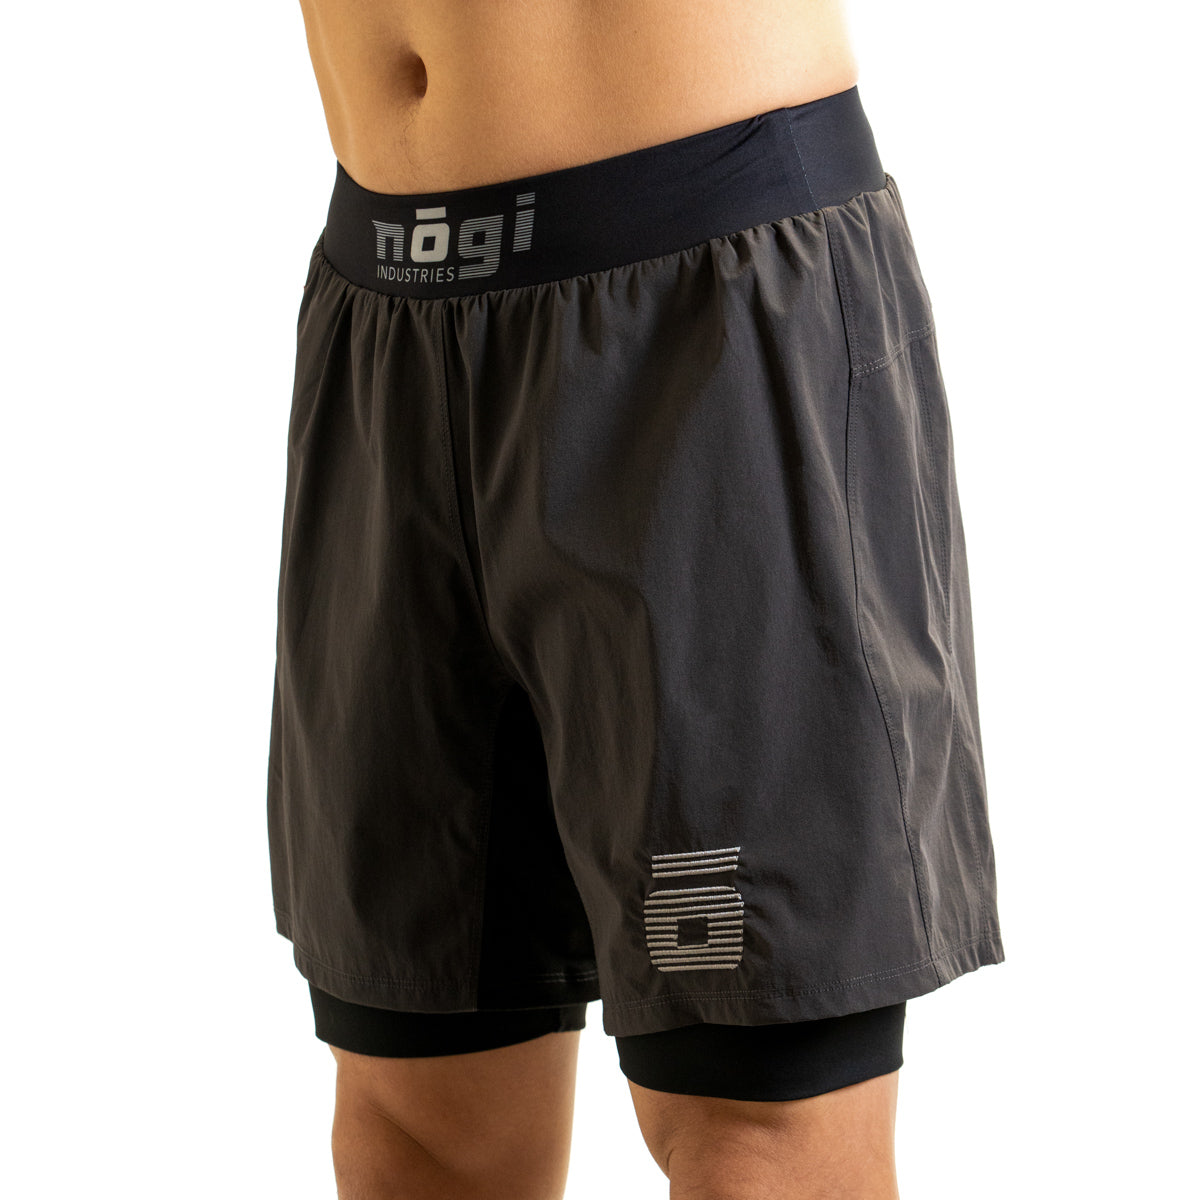 Ghost 7" Premium Lined Grappling Shorts - New Jersey Gray left view